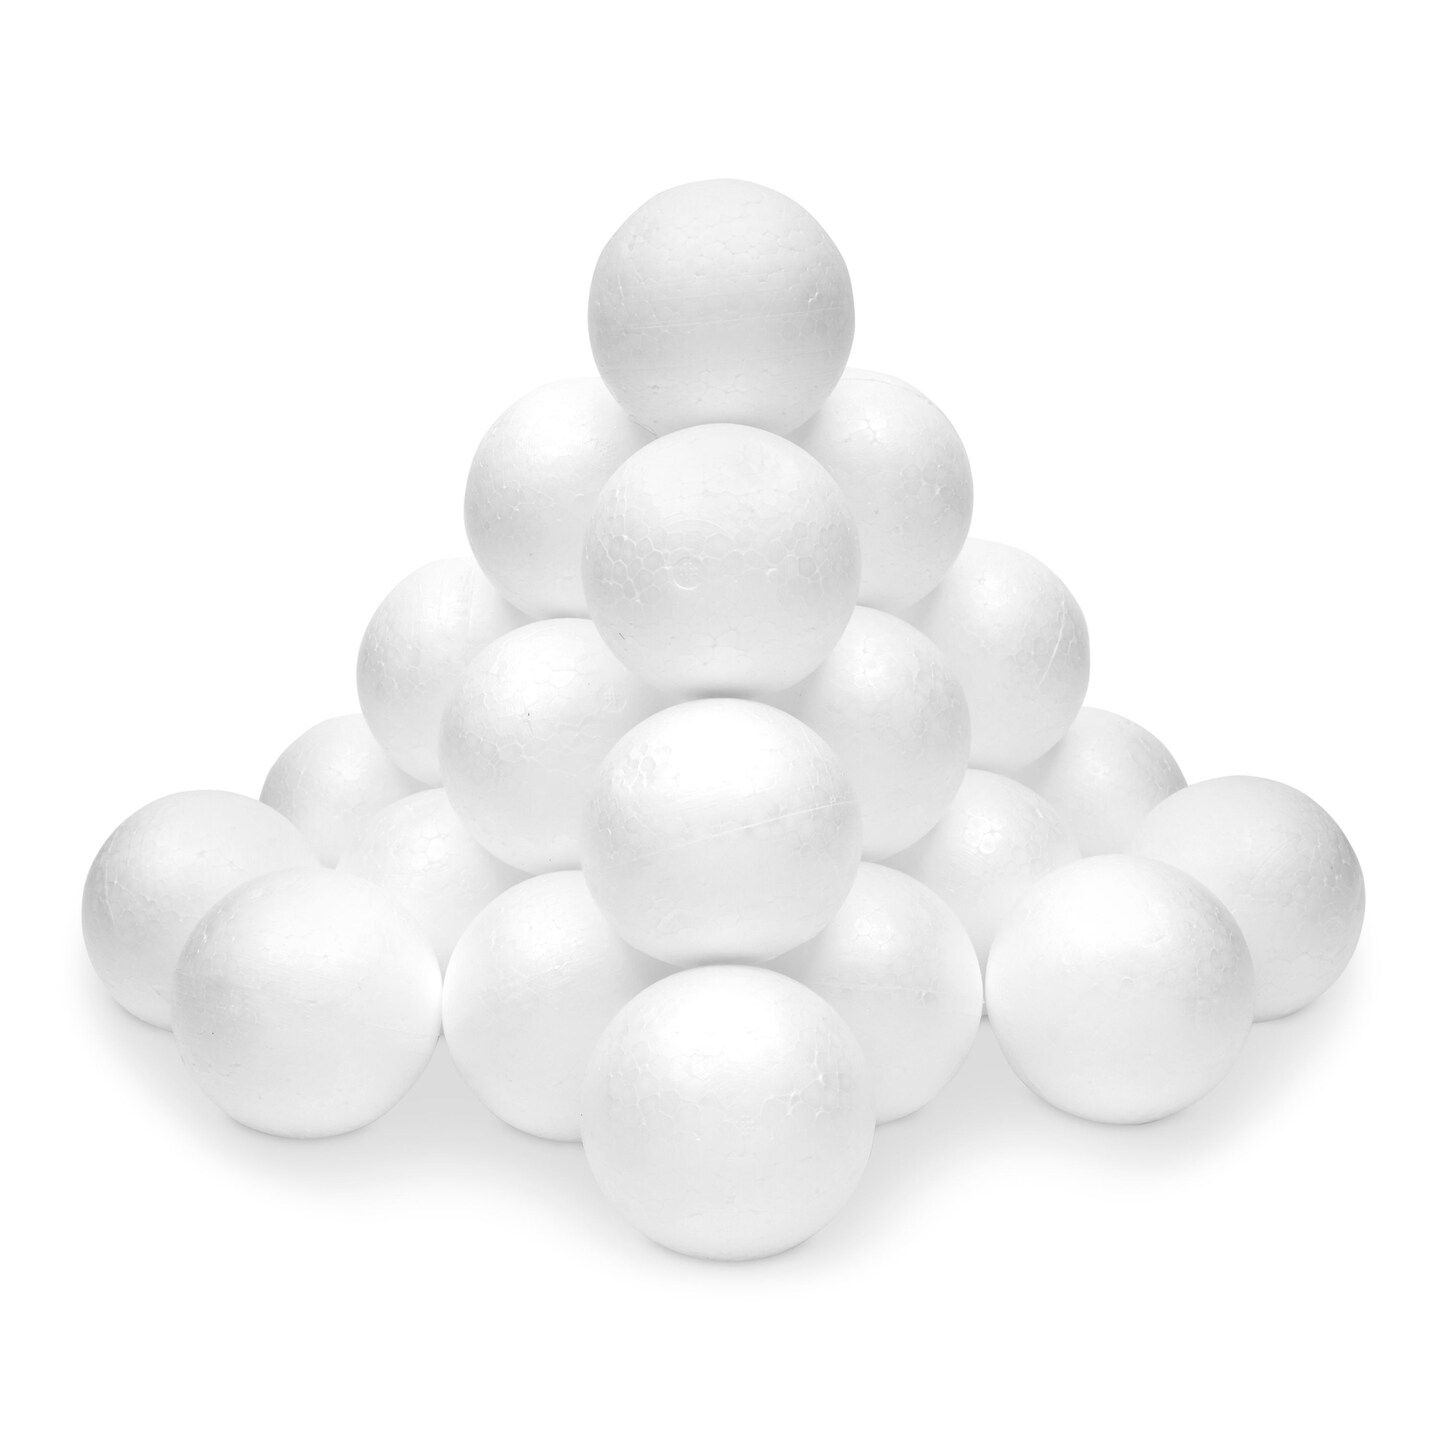  Evershine 24 Pack 3 Inch Craft Foam Ball - White Smooth Craft  Foam Polystyrene Balls for DIY Craft and Art School Project : Arts, Crafts  & Sewing